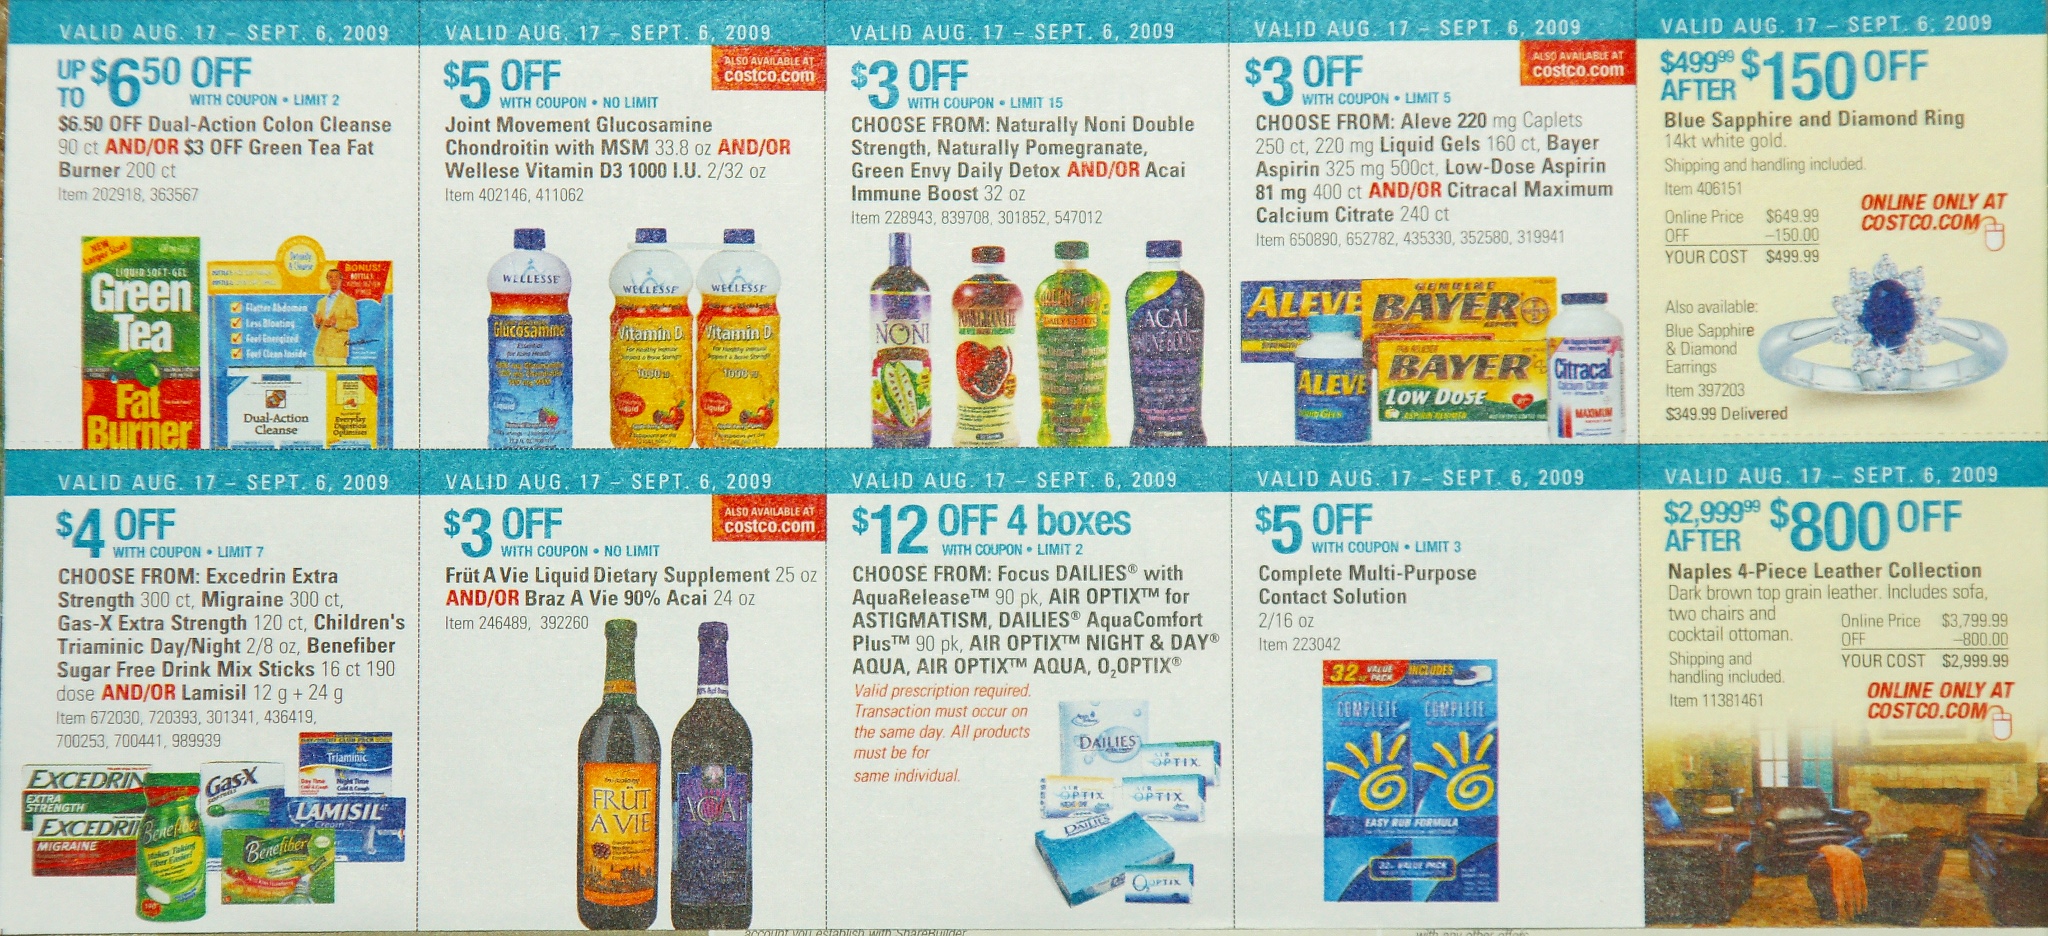 Full image coupon book page ->10<-